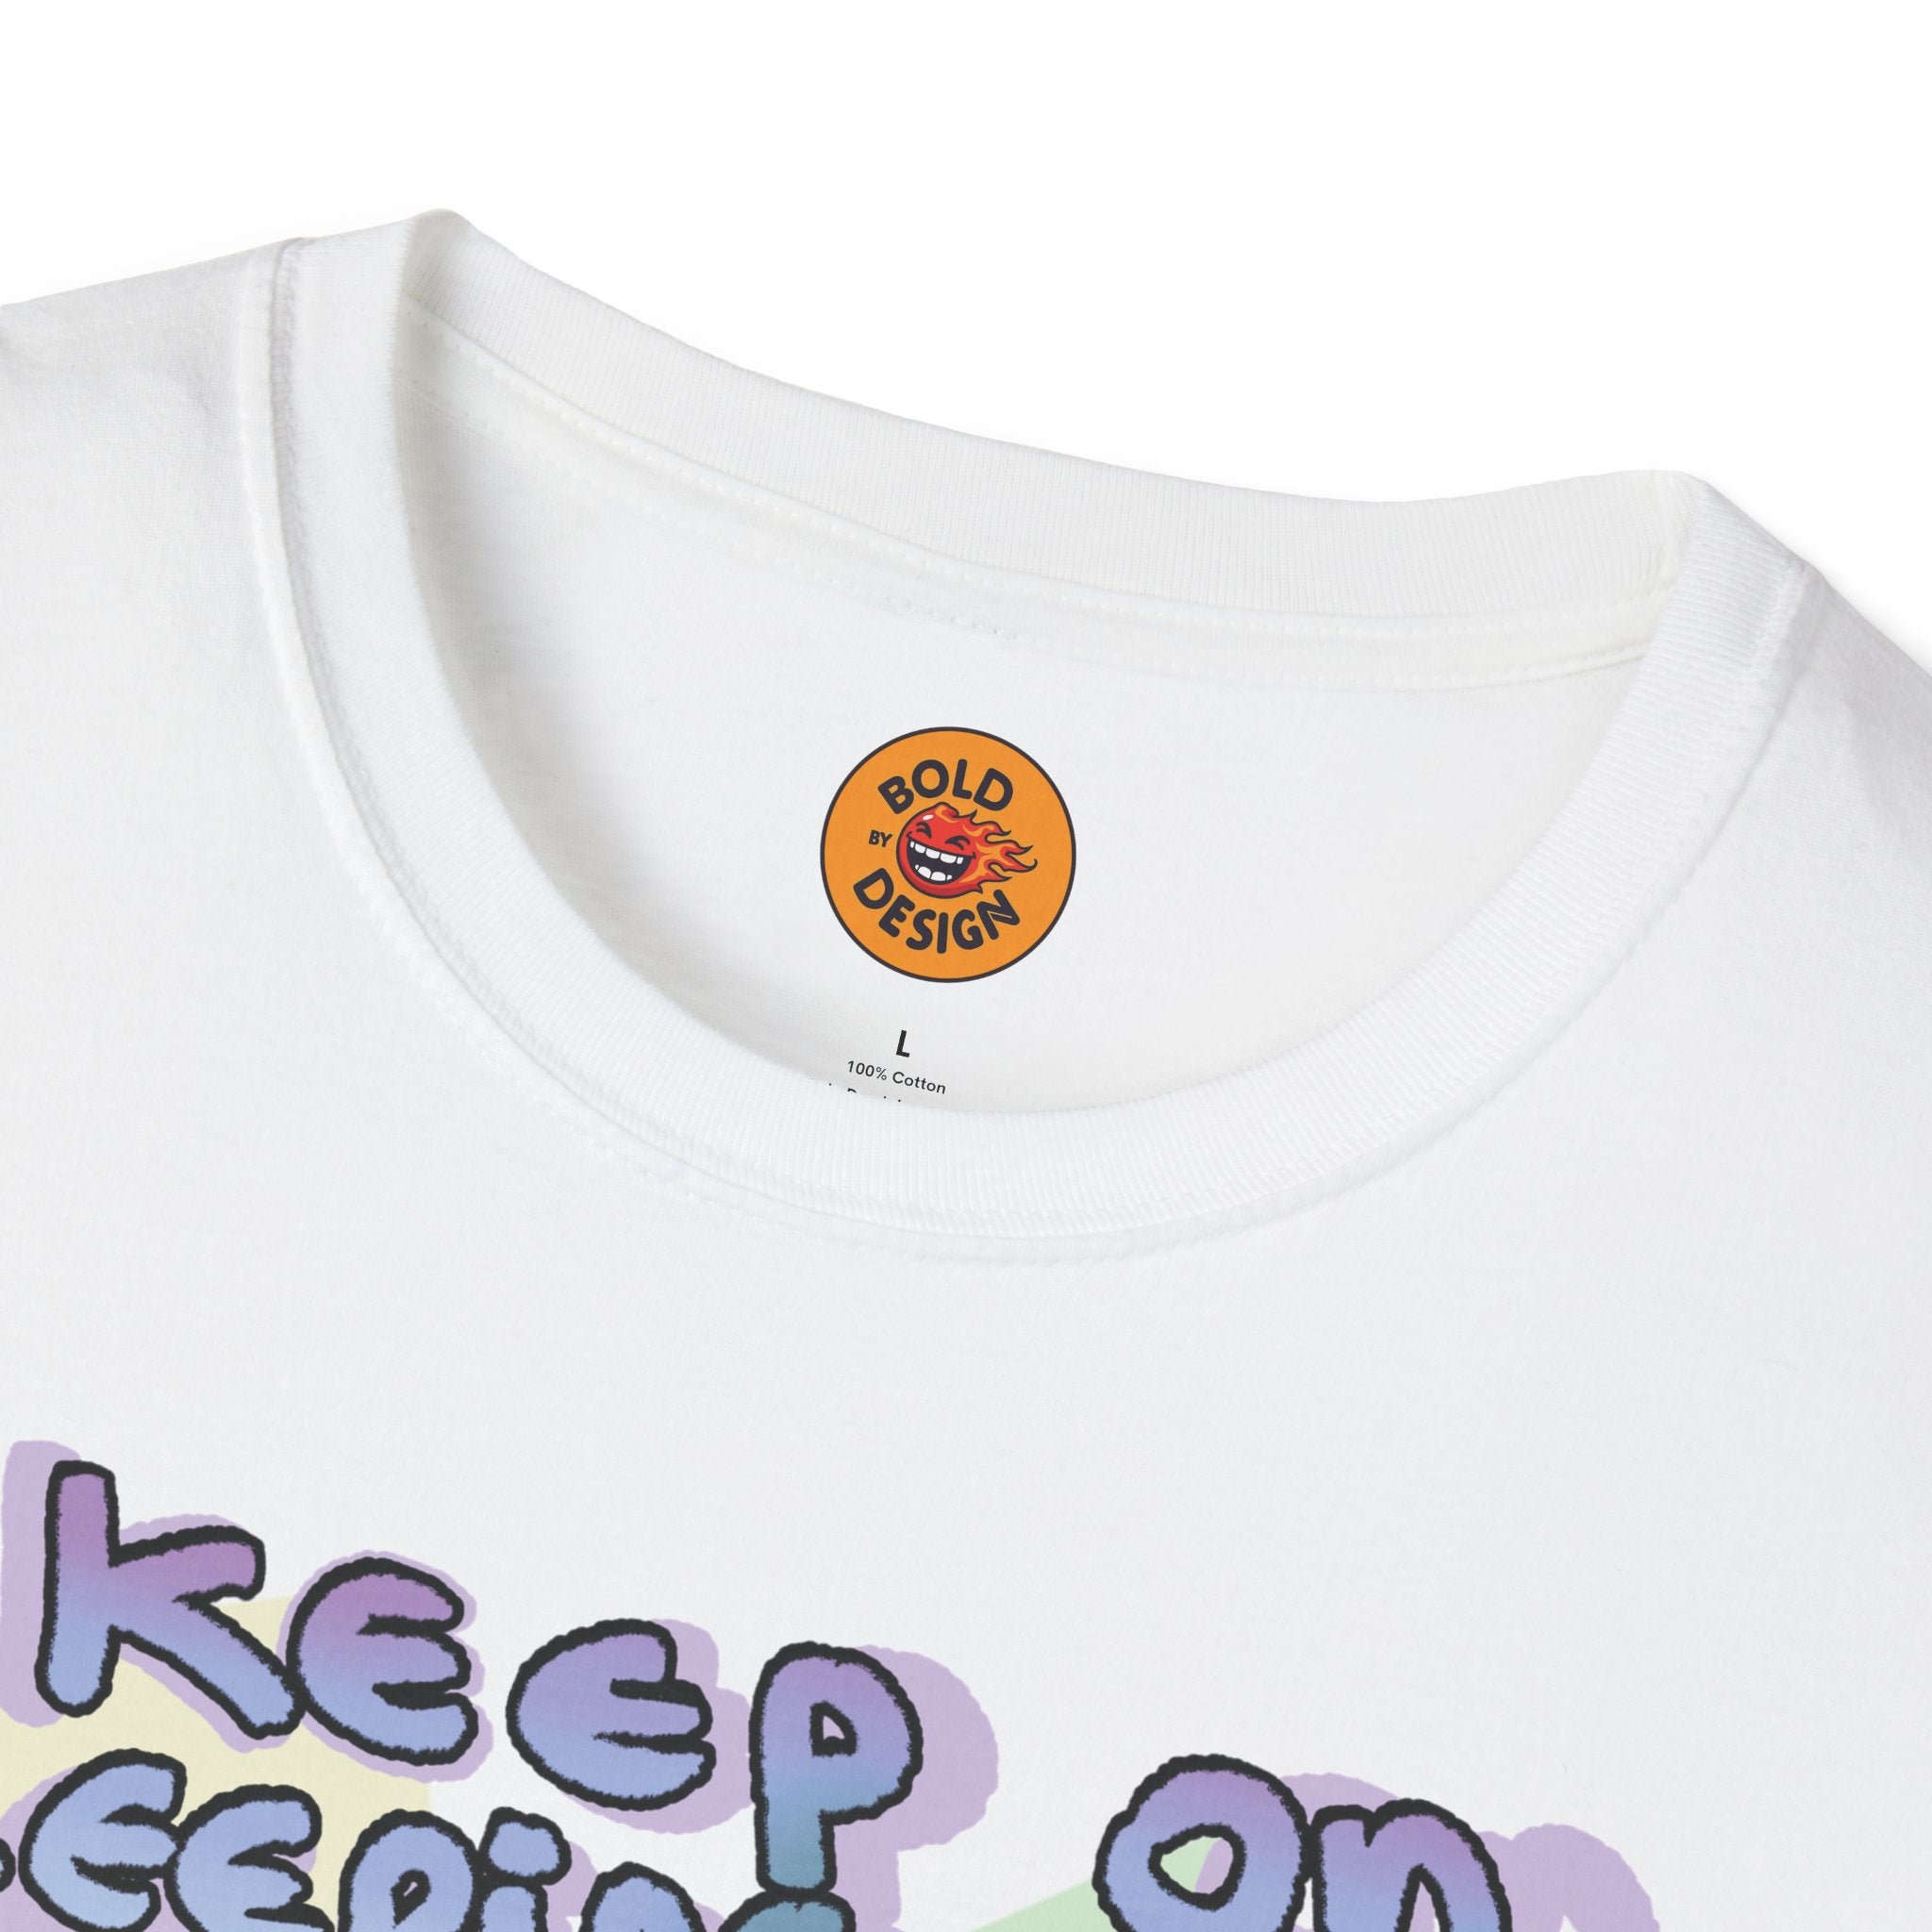 Keep On Keeping On Dog Lover's Tee white